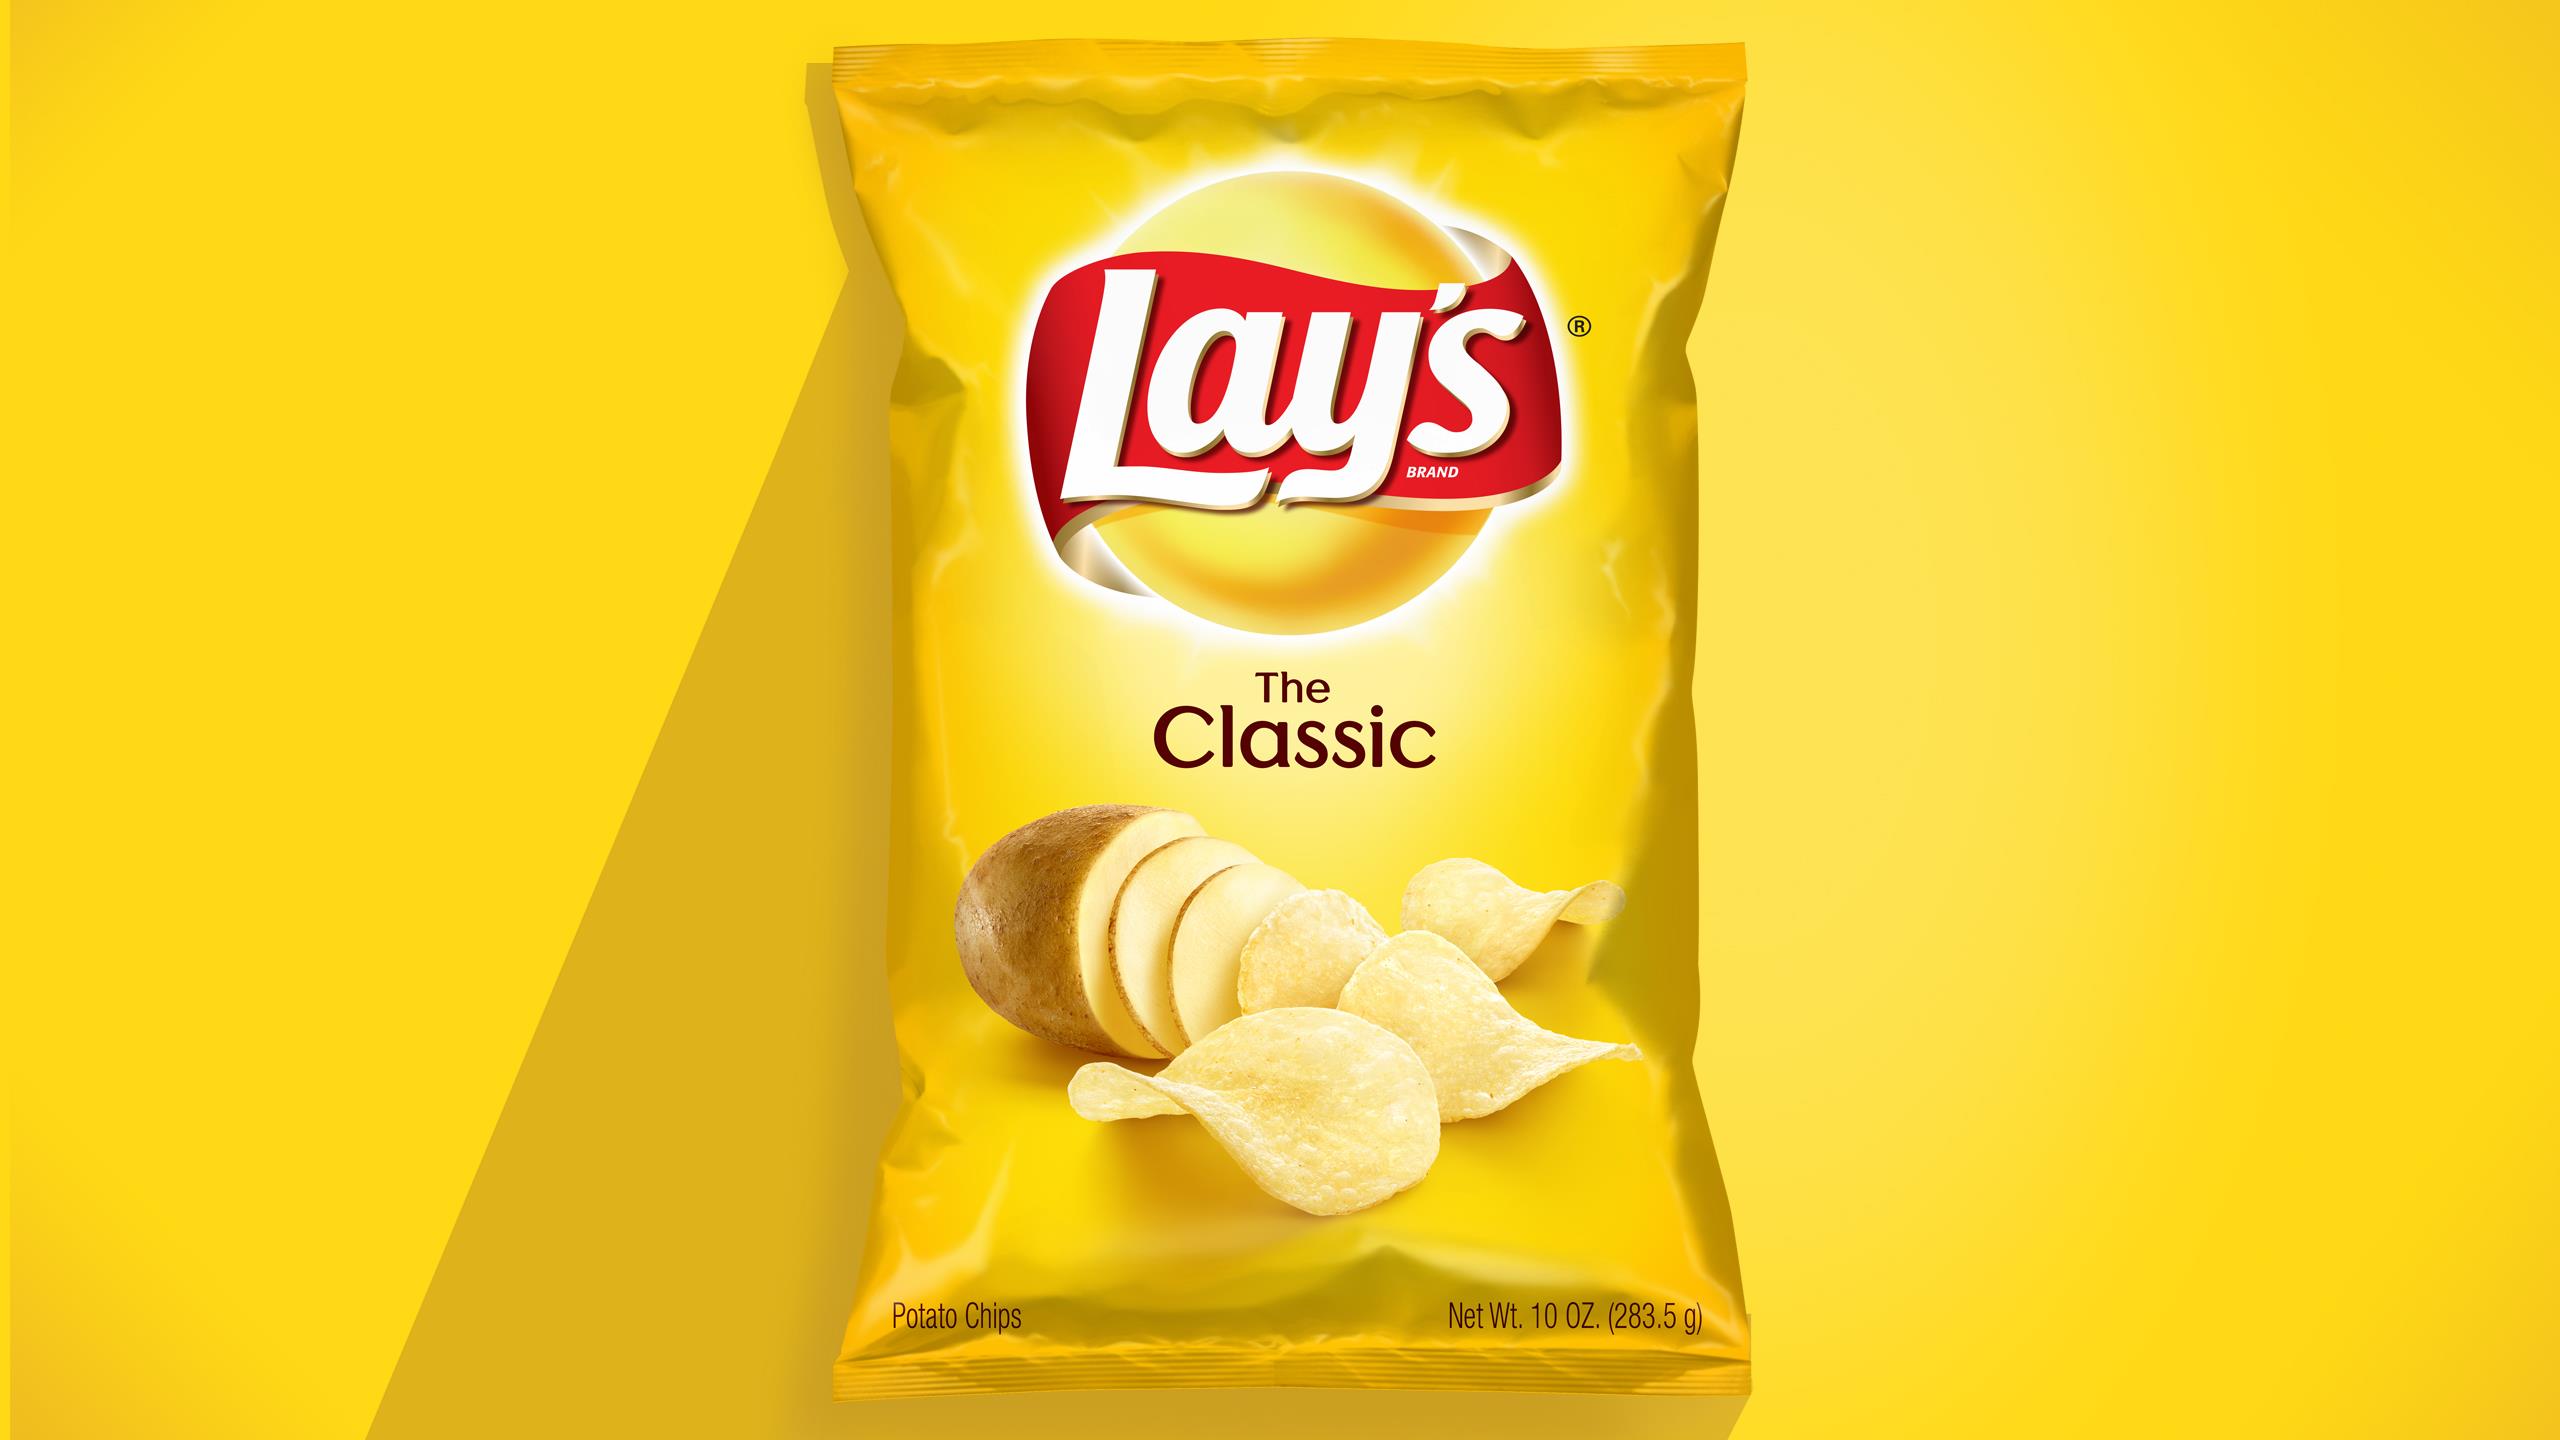 Lays Classic Potato Chips Wallpaper Background 62438 2560x1440px